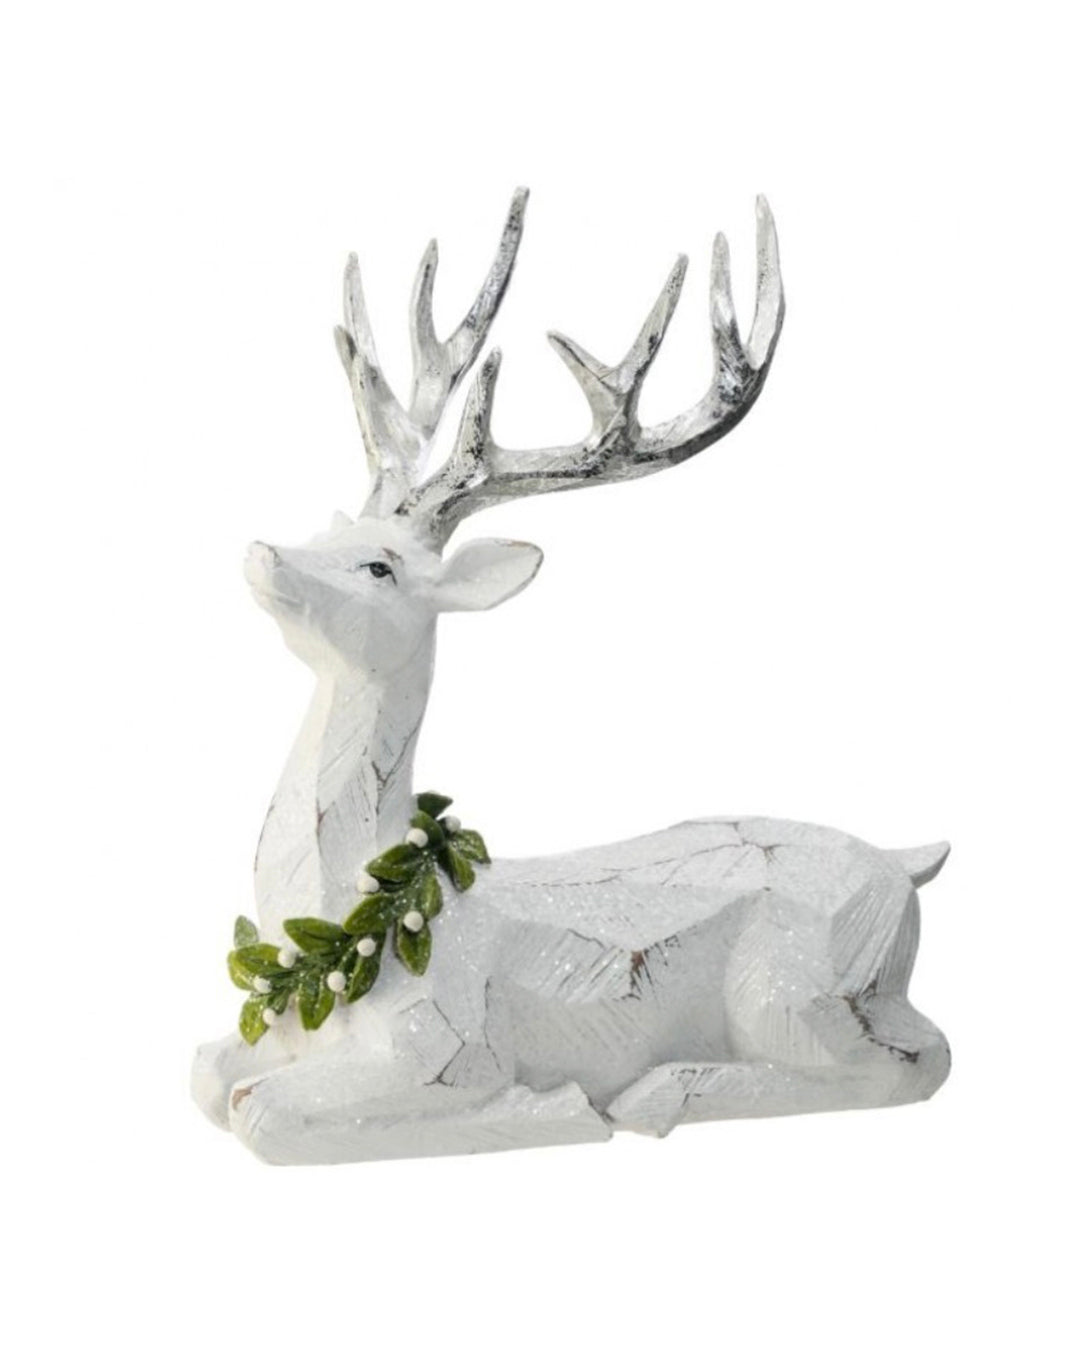 12" RSN FROSTED LAYING MISTLETOE DEER